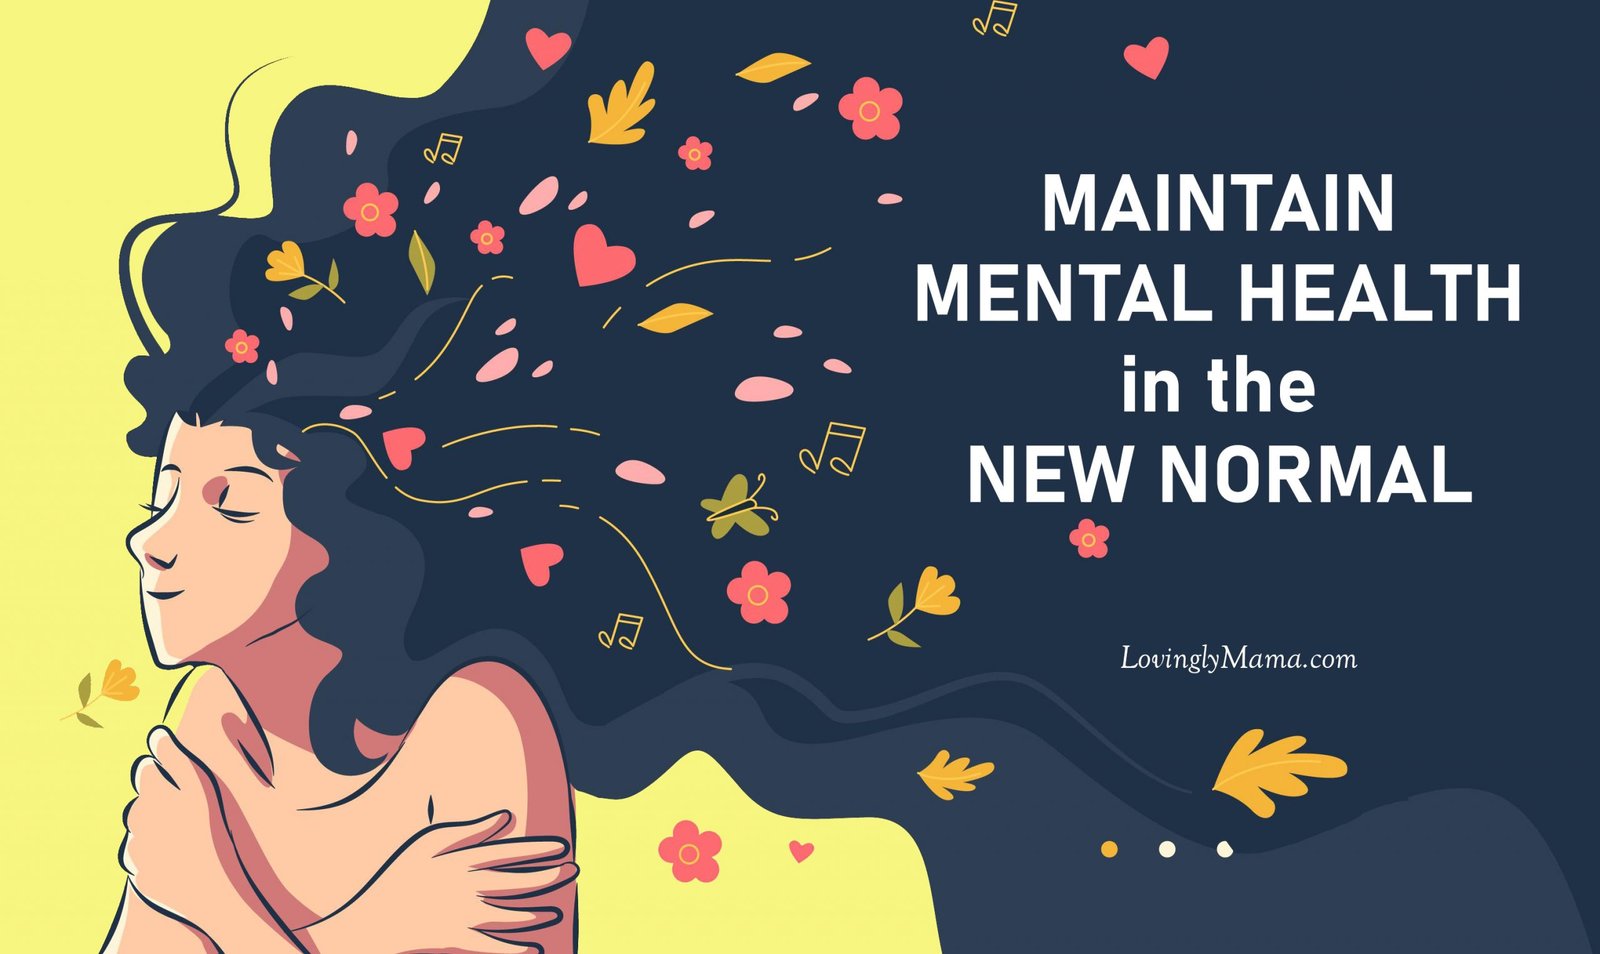 Pinay Beauty and Style: Taking Care of My Mental Health with Free